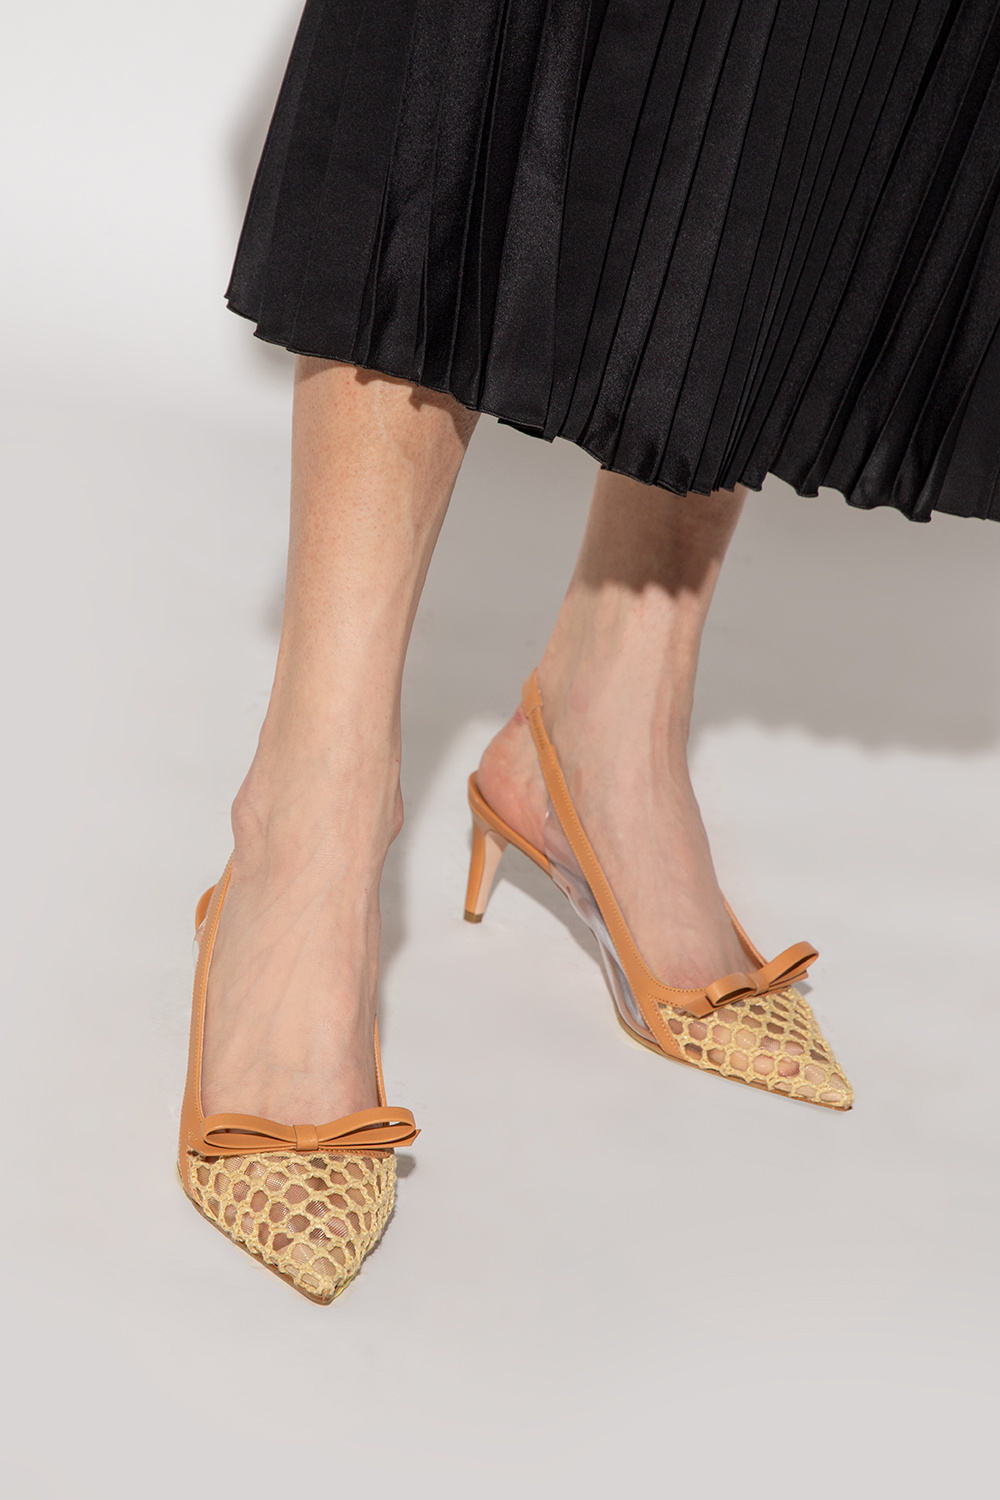 Red Valentino Leather pumps